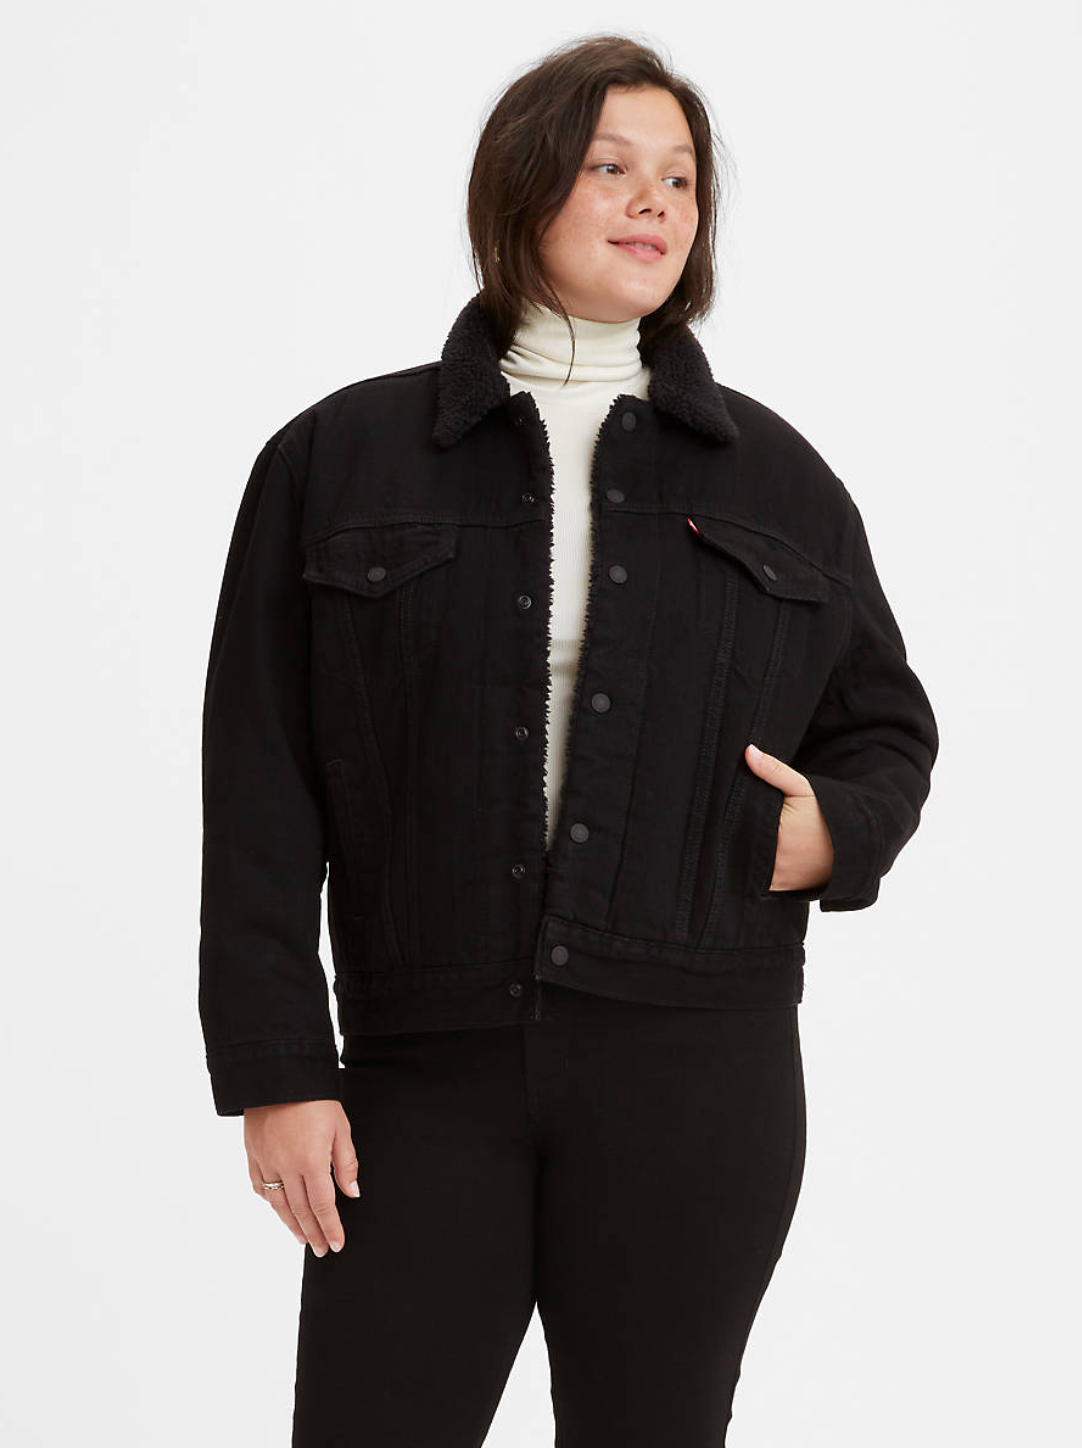 These Are the 27 Best Black Jean Jackets for Women